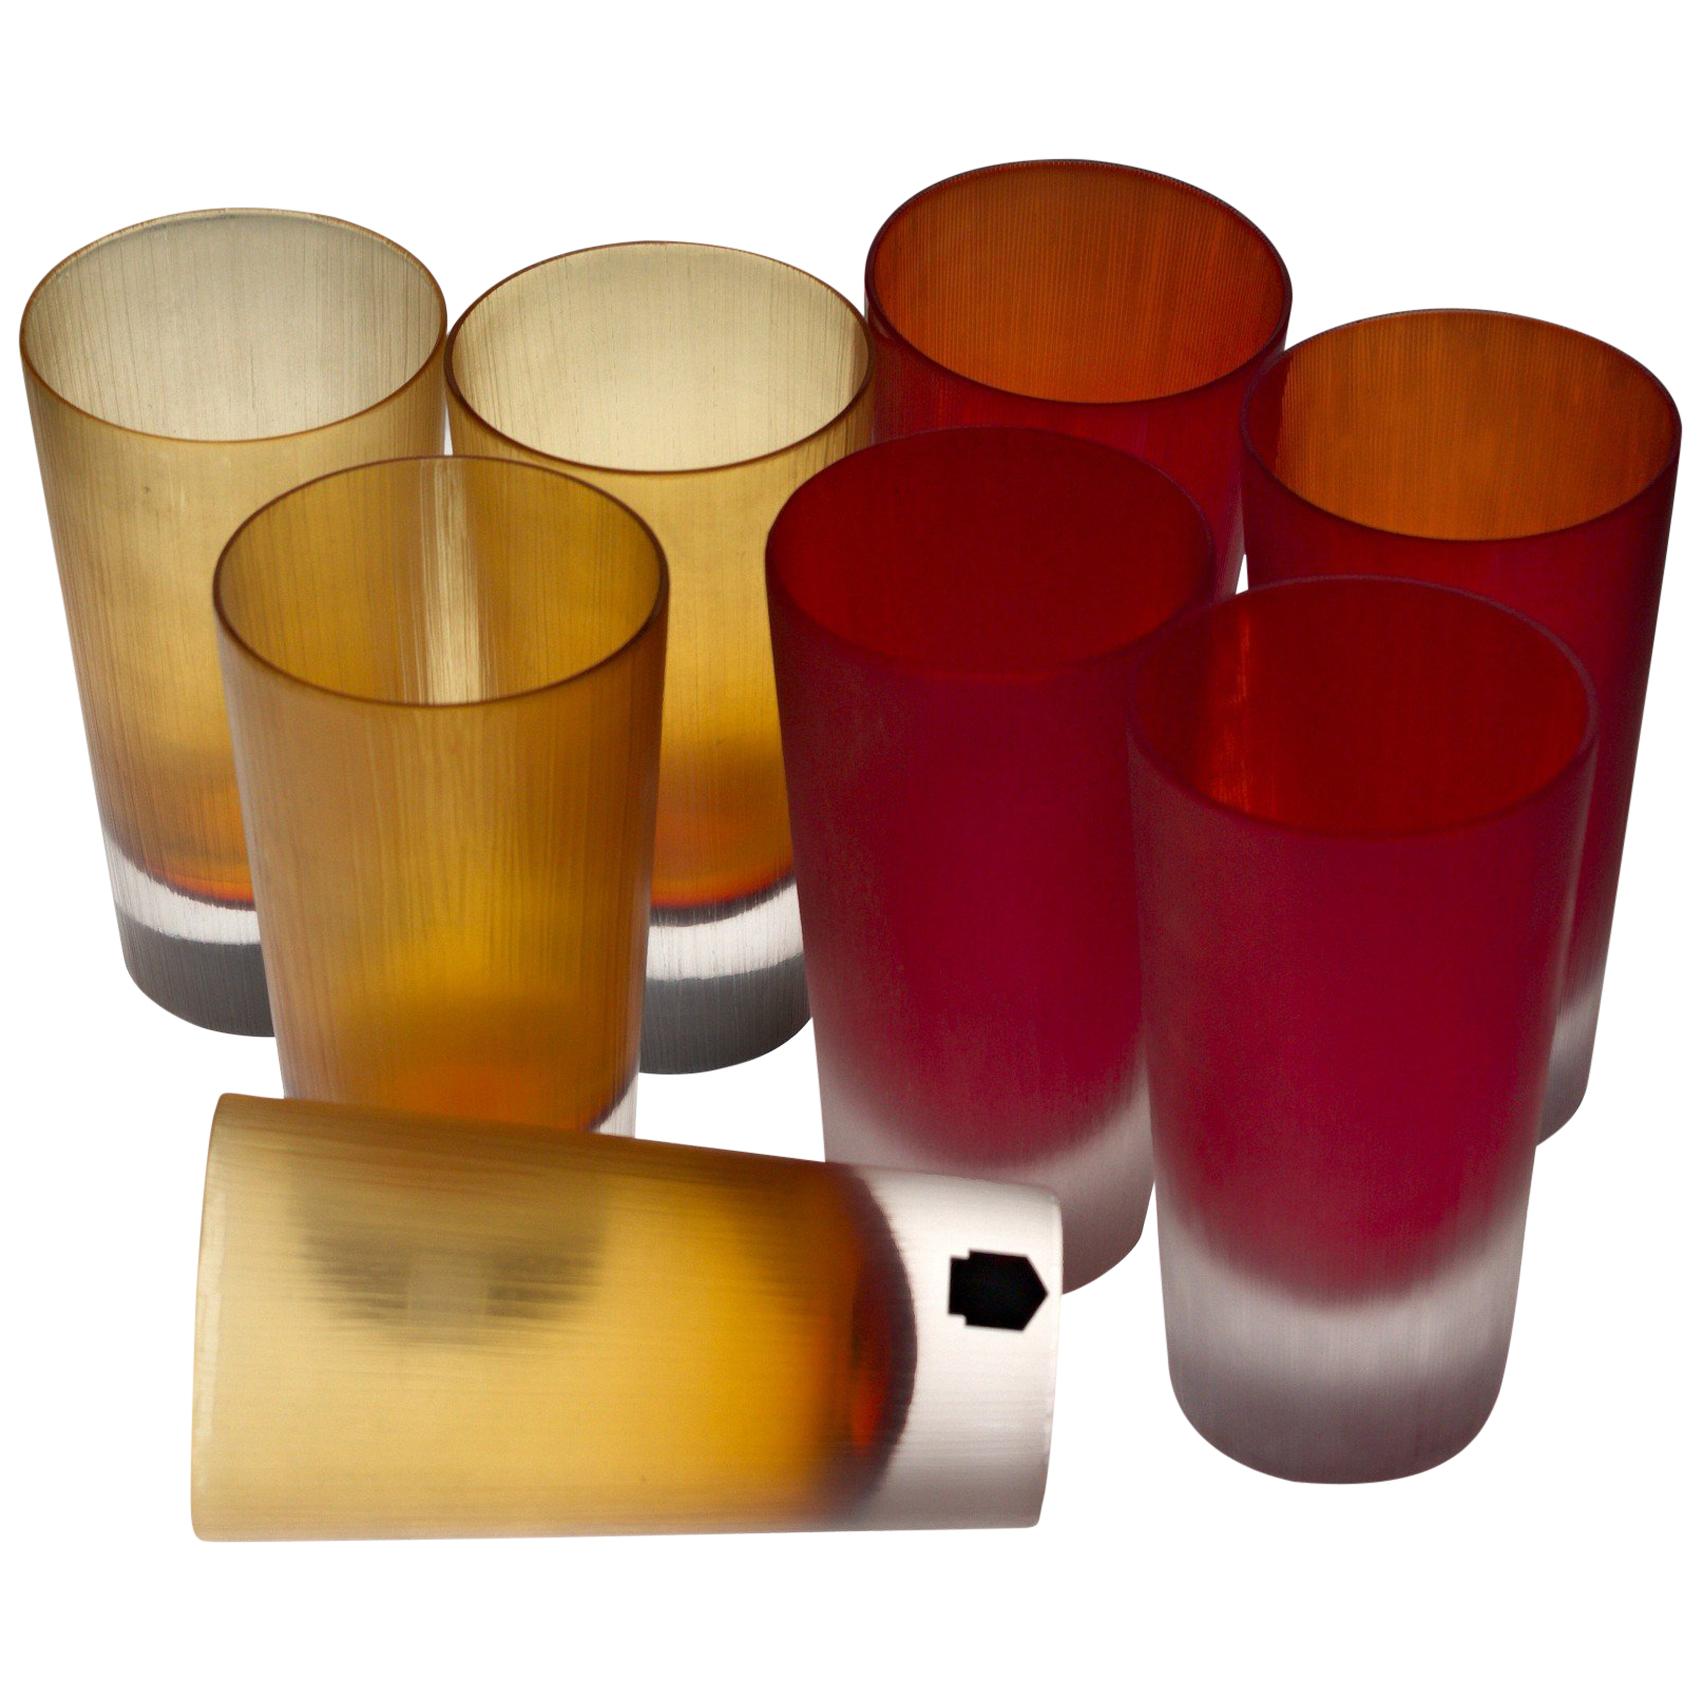 Cenedese, 8 Tumblers Red or Amber, Incisi Velati Heavy Sommerso Murano Glass